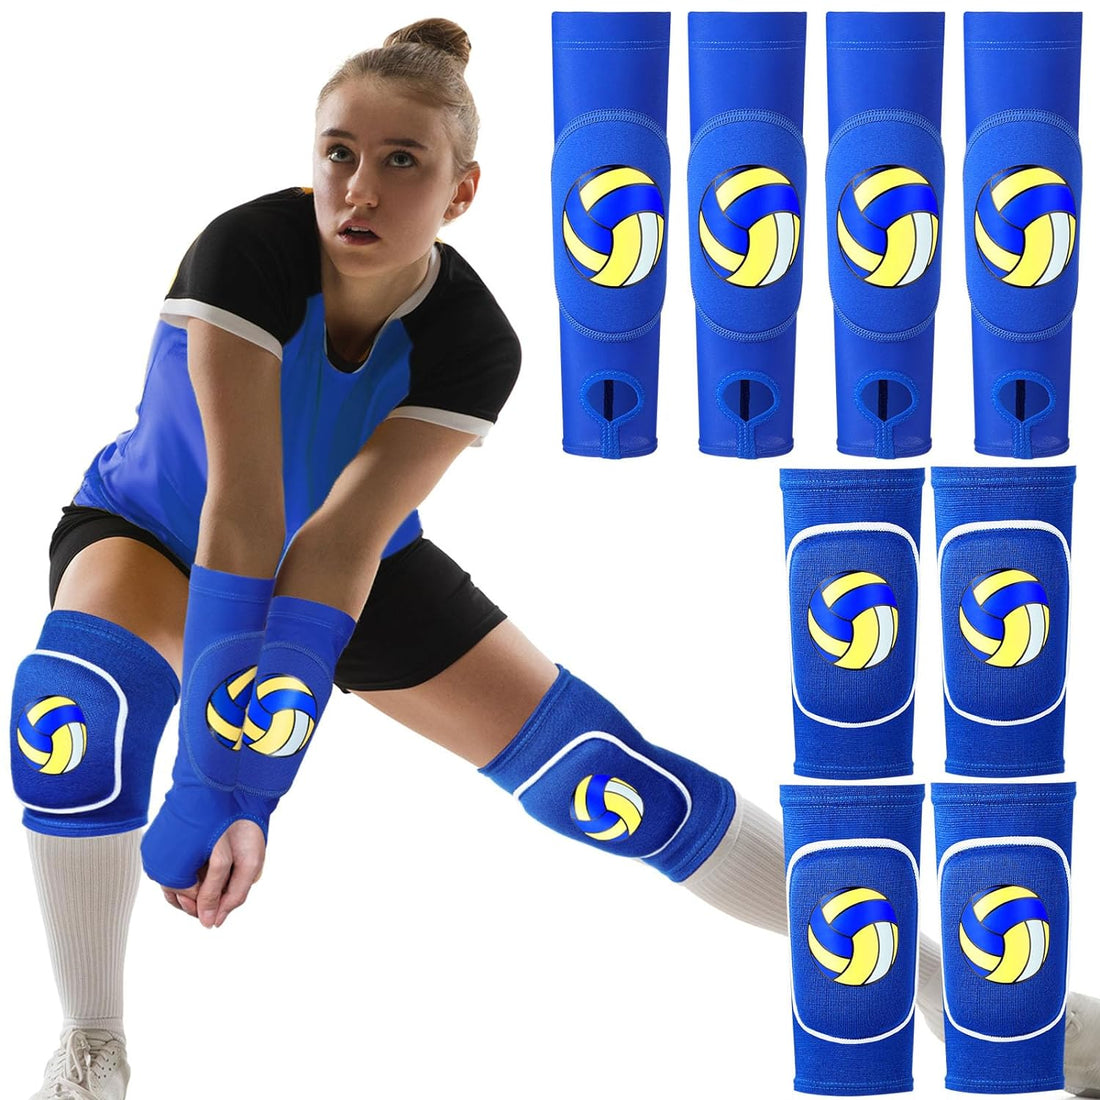 Volleyball Knee Pad and Arm Sleeve with Protection Pad Elbow Sleeve with Thumb Hole Volleyball Accessory for Girl Woman (Blue,2 Sets)